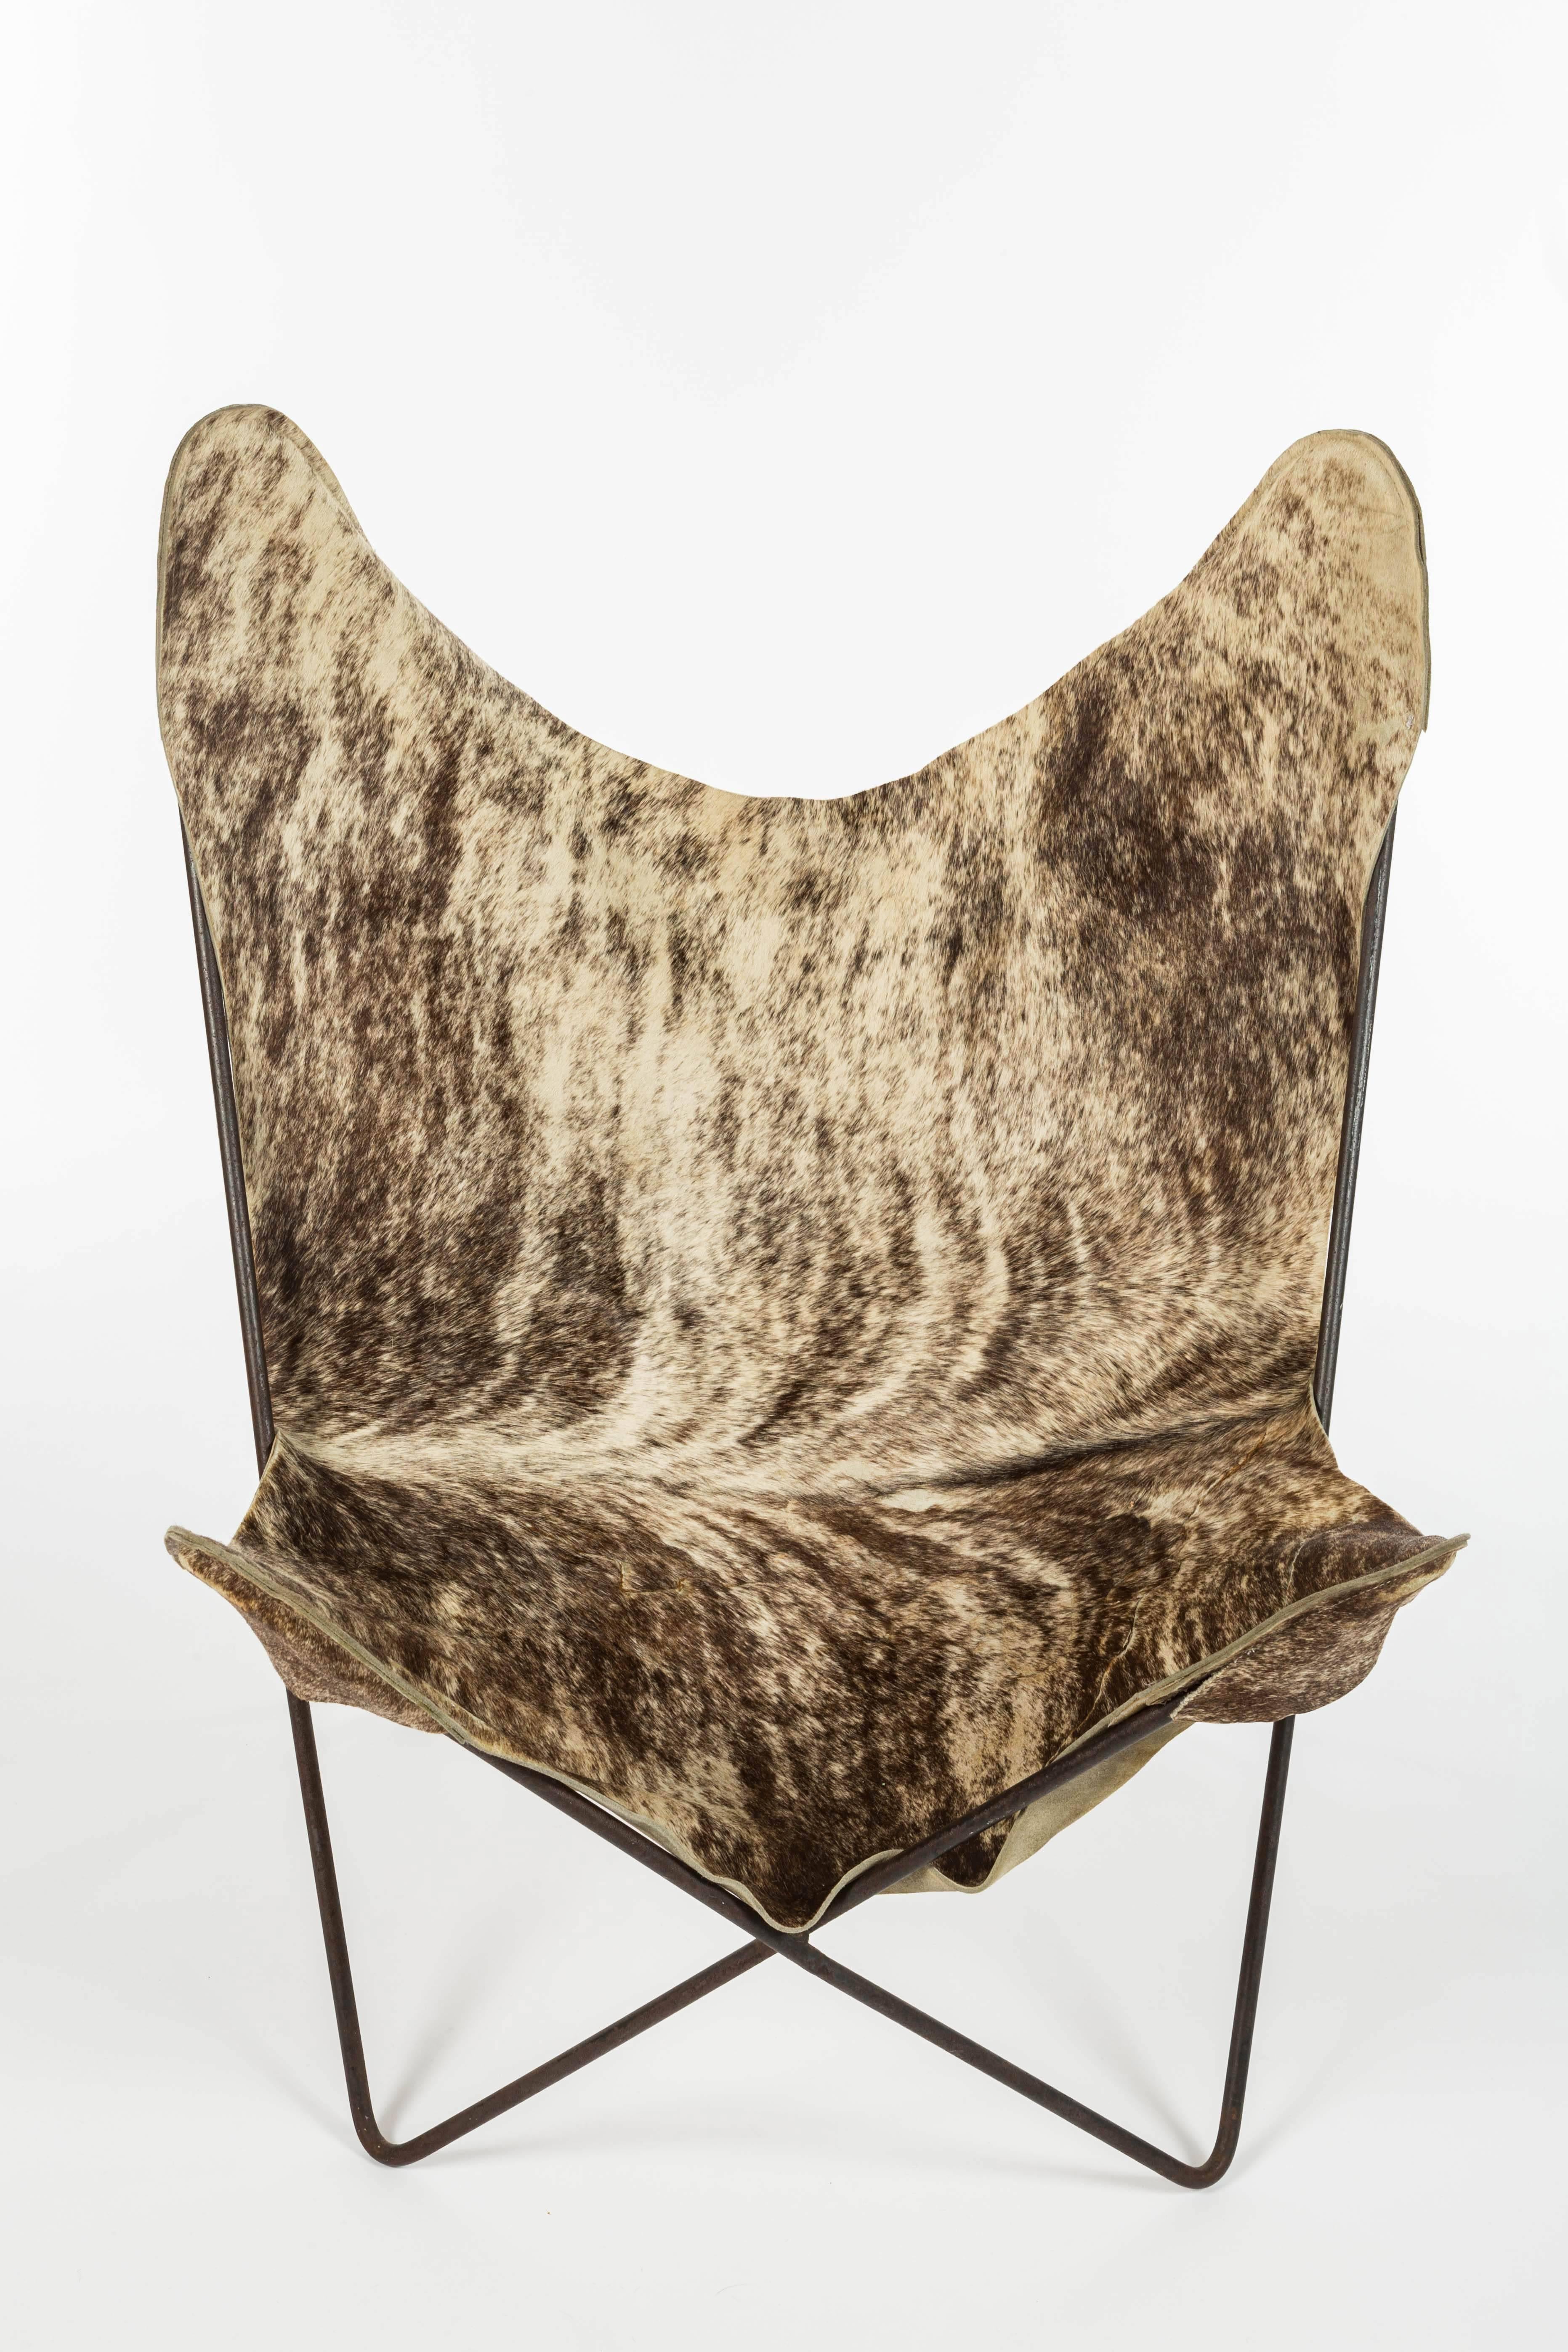 Italian c. 1960, pony hair on hide butterfly chair with iron frame. Repairs to hide on underside.